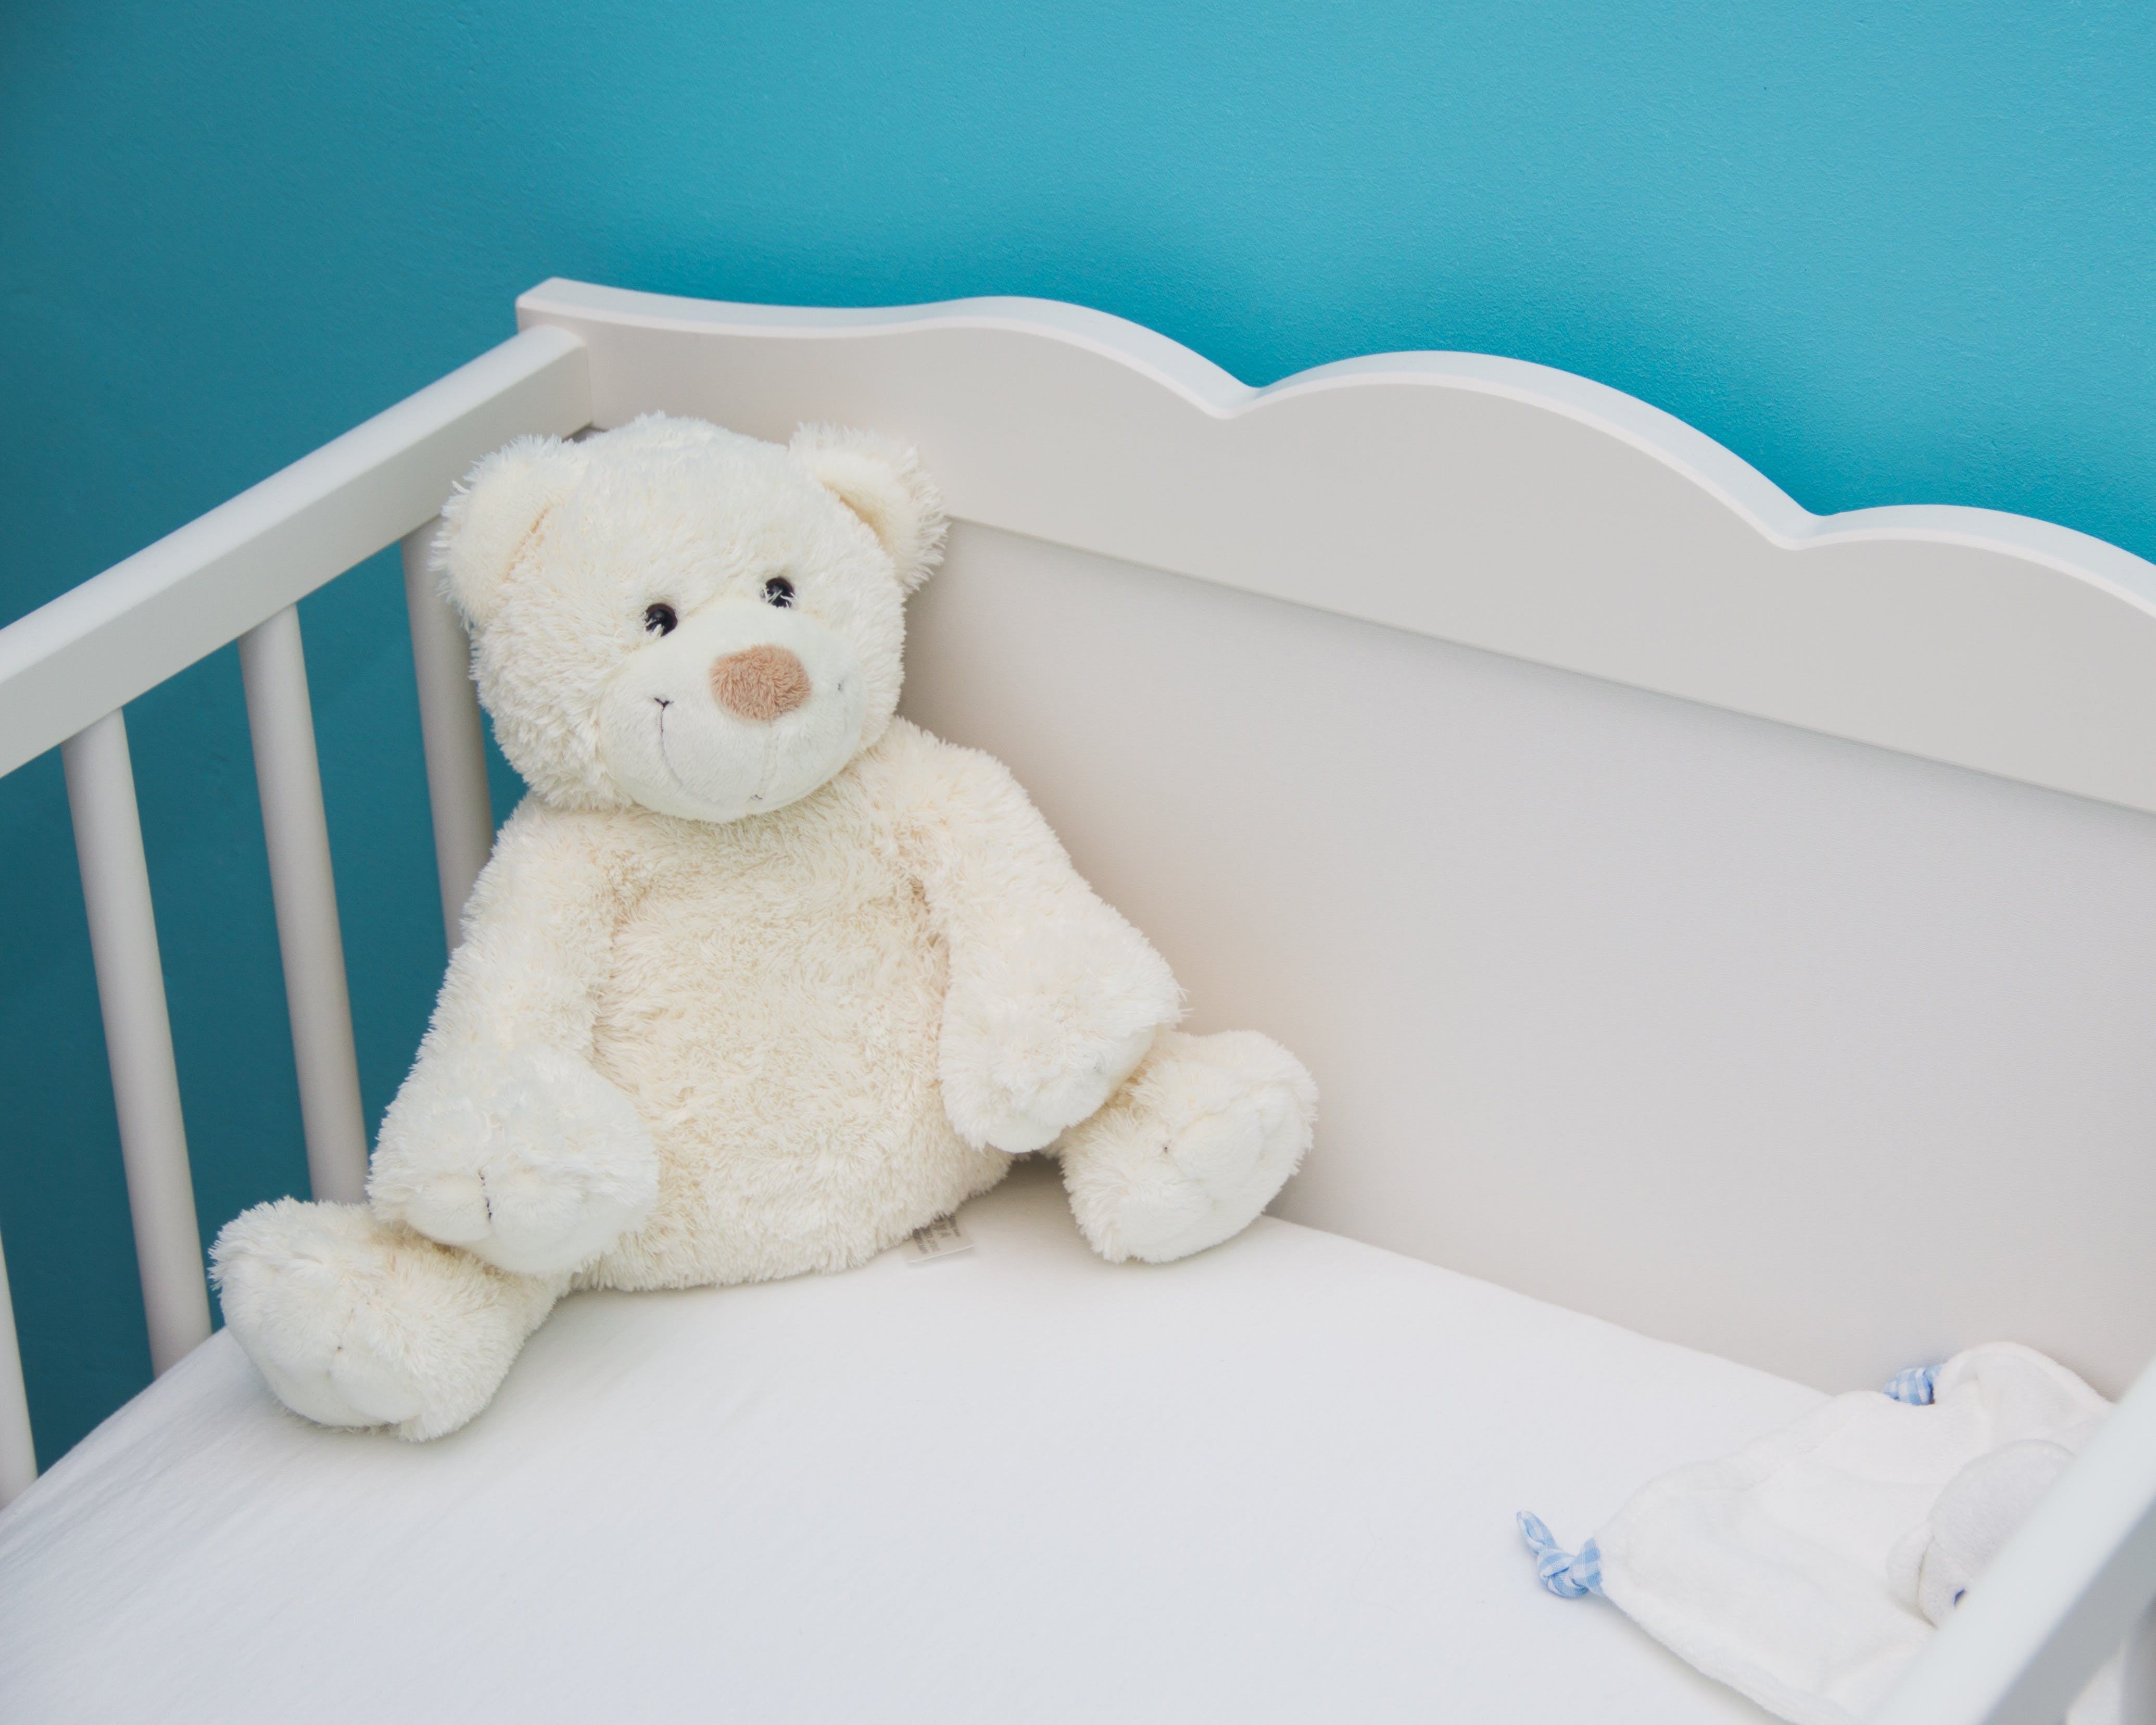 A white teddy bear toy on a baby crib. | Source: Pexels